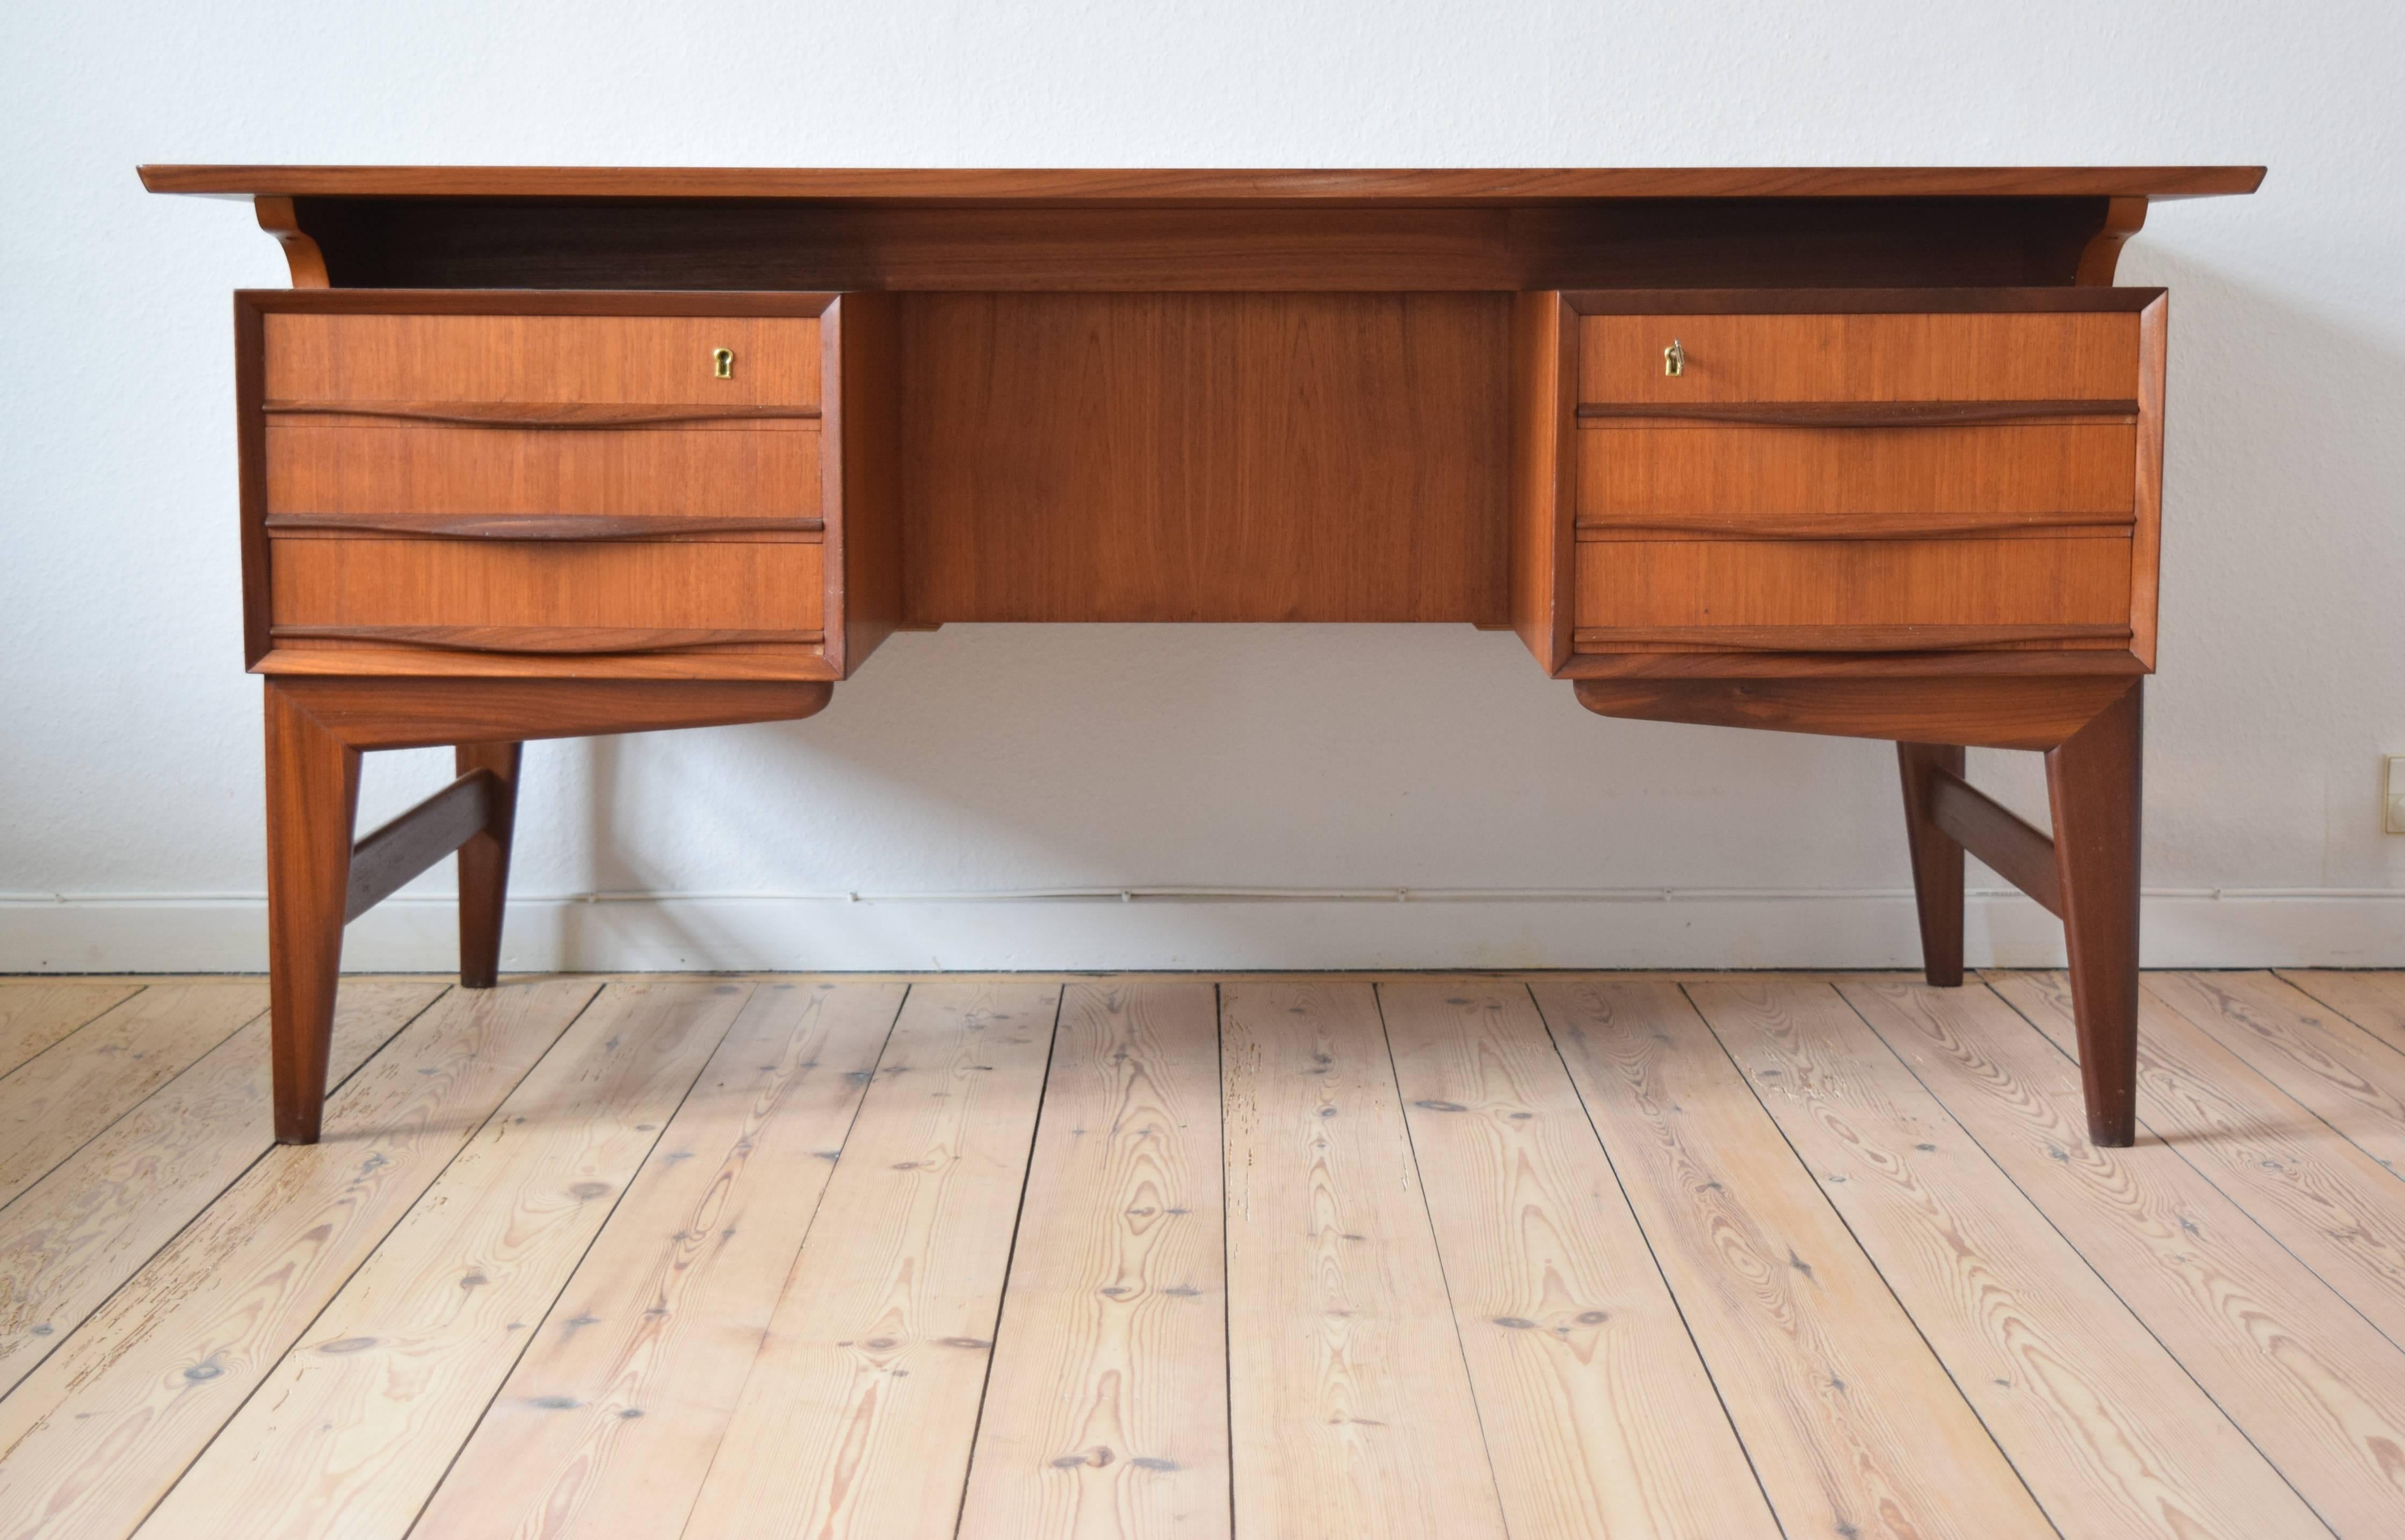 Teak executive floating desk from the 1960s manufactured in Denmark. This piece features six drawers, offering plenty of storage in the front and back. Two lockable drawers. Sits on a 'boomerang leg' base. The teak on the desk is in a fantastic